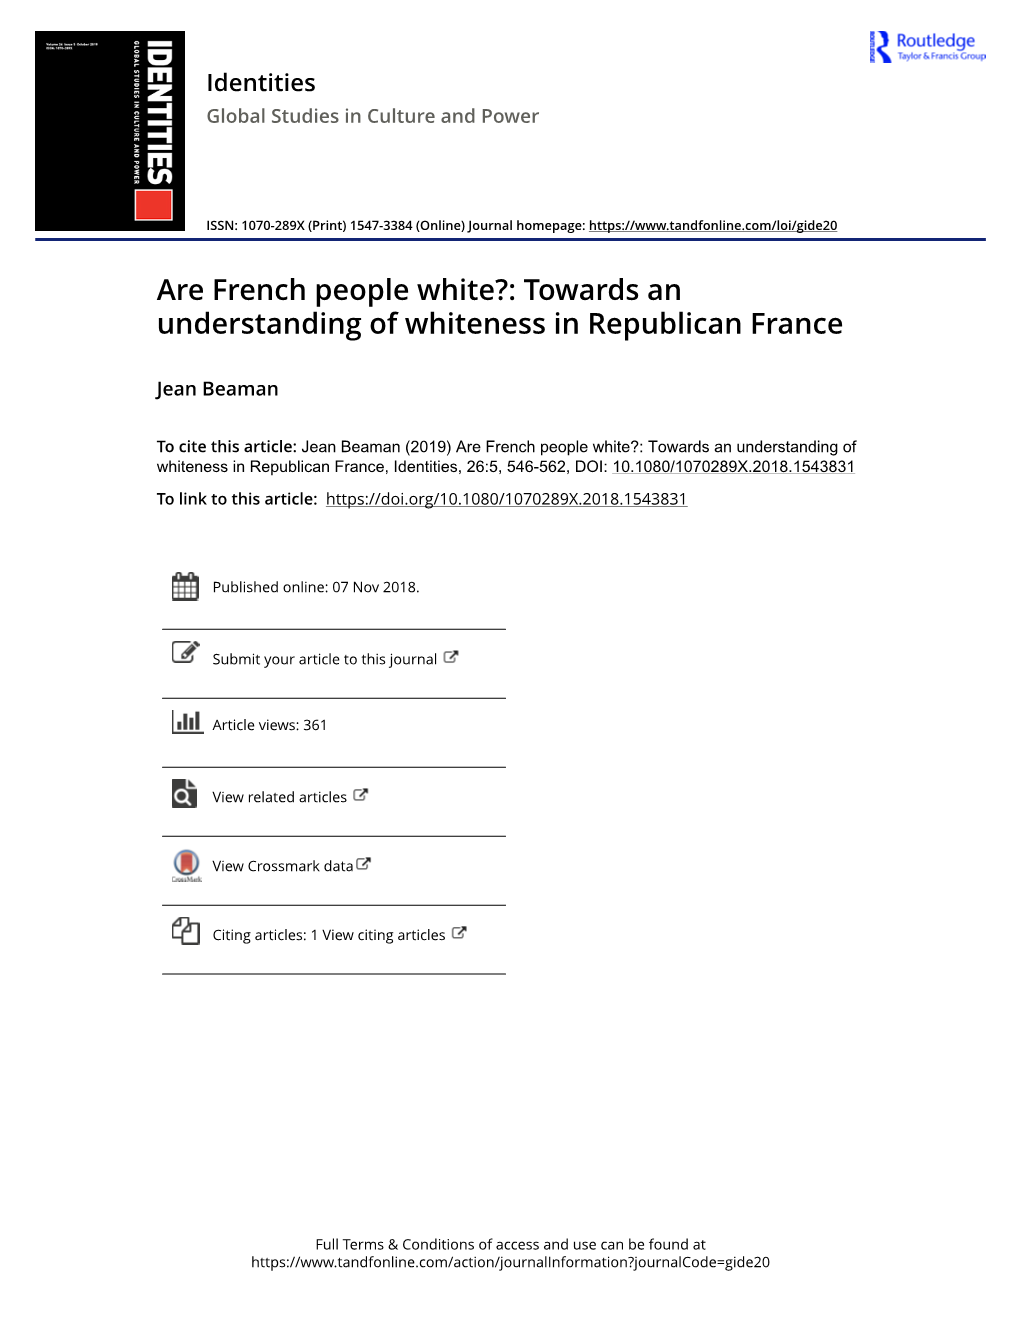 Towards an Understanding of Whiteness in Republican France